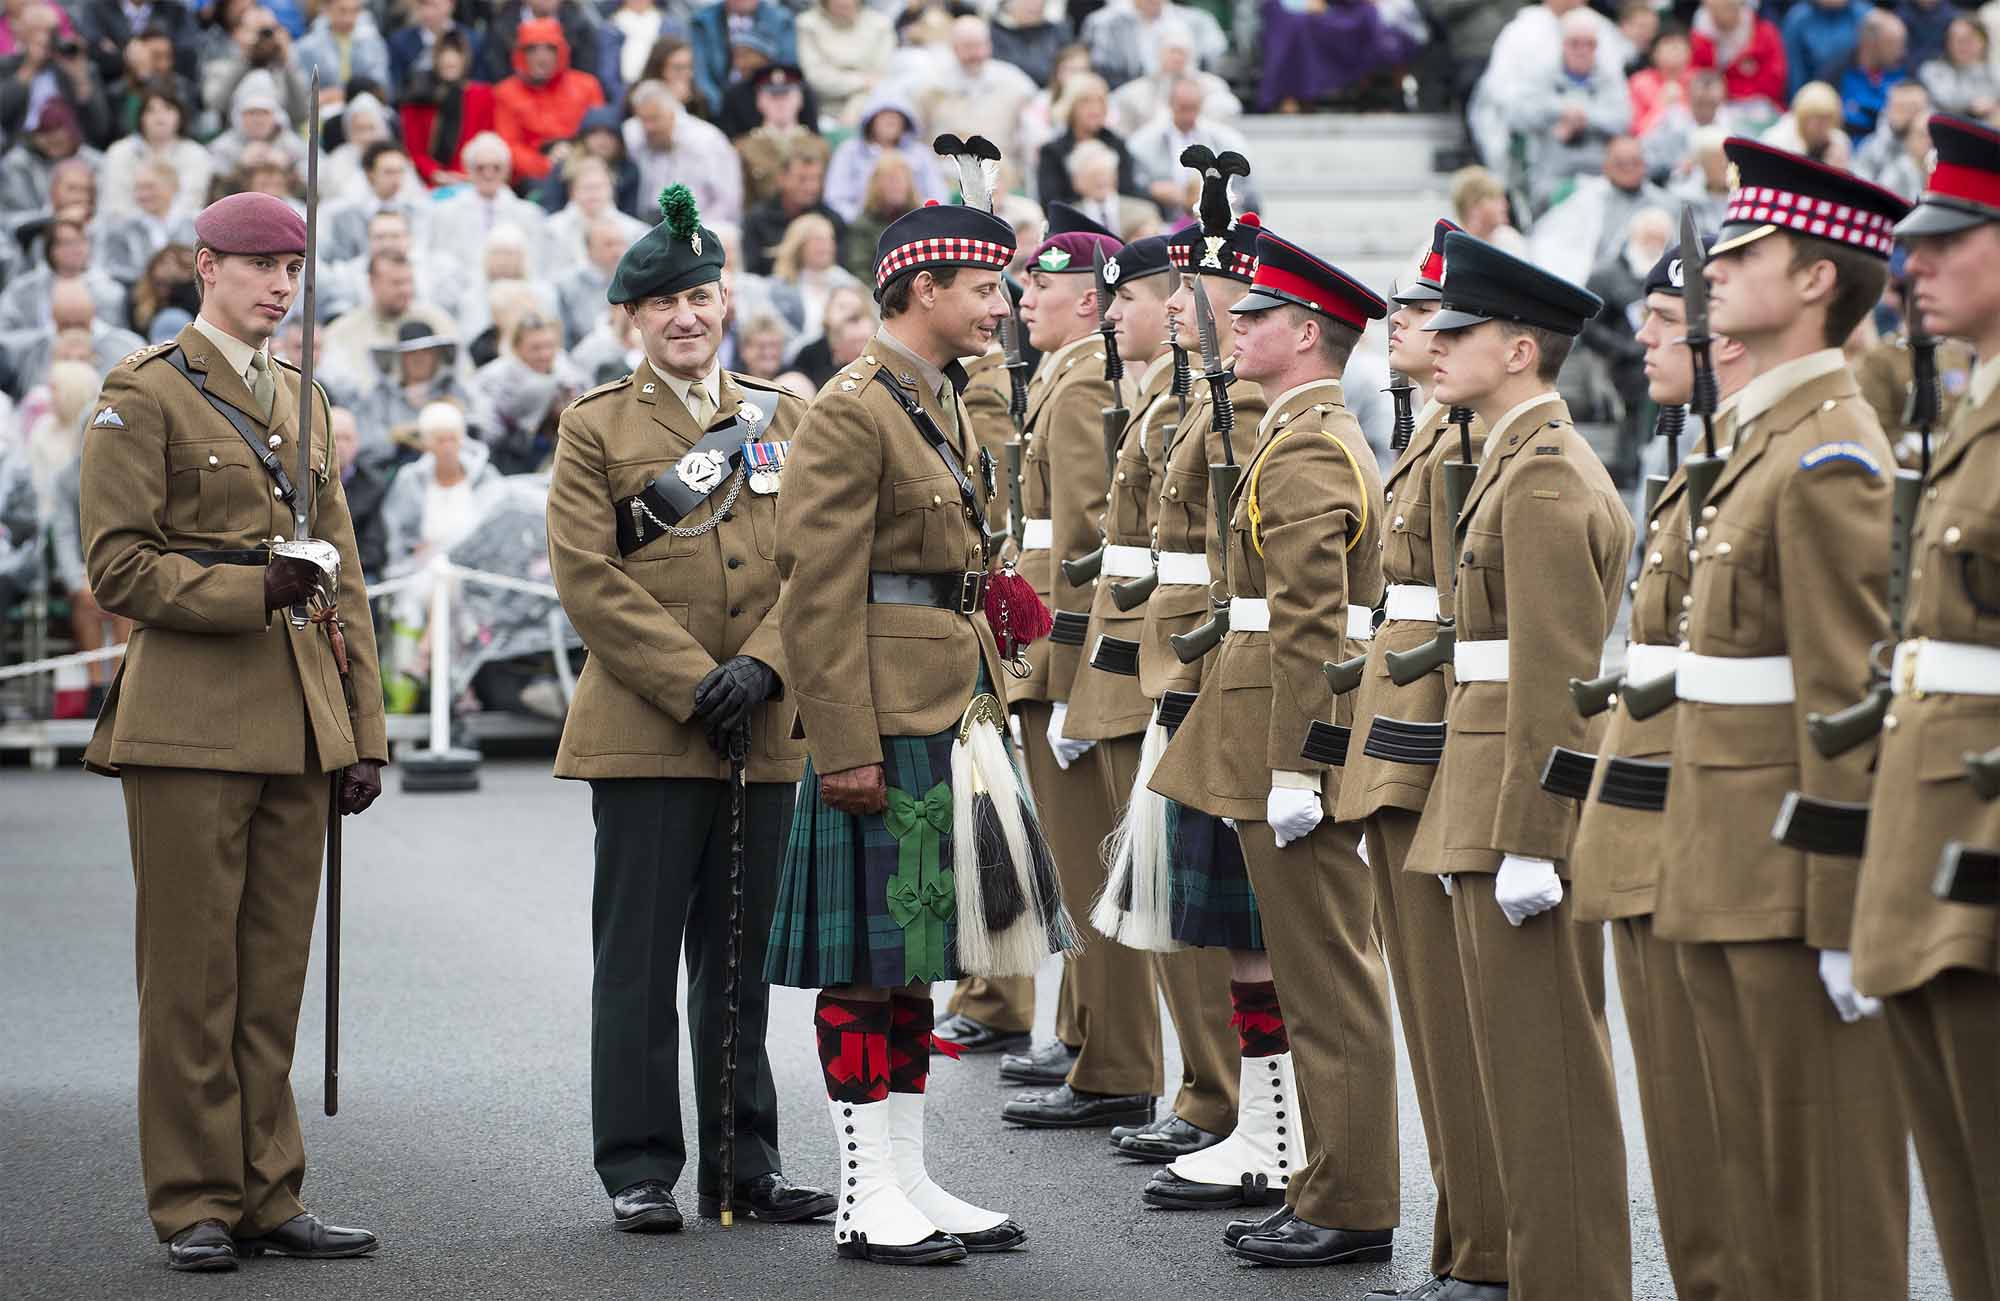 Pictured:Lieutenant Colonel Neil Tomlin, Commanding Officer of 4th battalion The Royal Regiment of Scotland inspecting some of the Junior Soldiers during the pass off parade. More than 600 teenagers from the Army Foundation College marched on their way to a new career when they graduated from the military training establishment in Harrogate, North Yorkshire. The college in Penny Pot Lane, Harrogate runs two types of course – a 40-week long course and a shorter 20-week course to train 16-17 year olds for a wide variety of Army careers. NOTE TO DESKS:  MoD release authorised handout images.  All images remain Crown Copyright 2016.  Photo credit to read -Sgt Jamie Peters RLC (Phot) Email: jamiepeters@mediaops.army.mod.uk richardwatt@mediaops.army.mod.uk shanewilkinson@mediaops.army.mod.uk Richard Watt - 07836 515306 Shane Wilkinson - 07901 590723